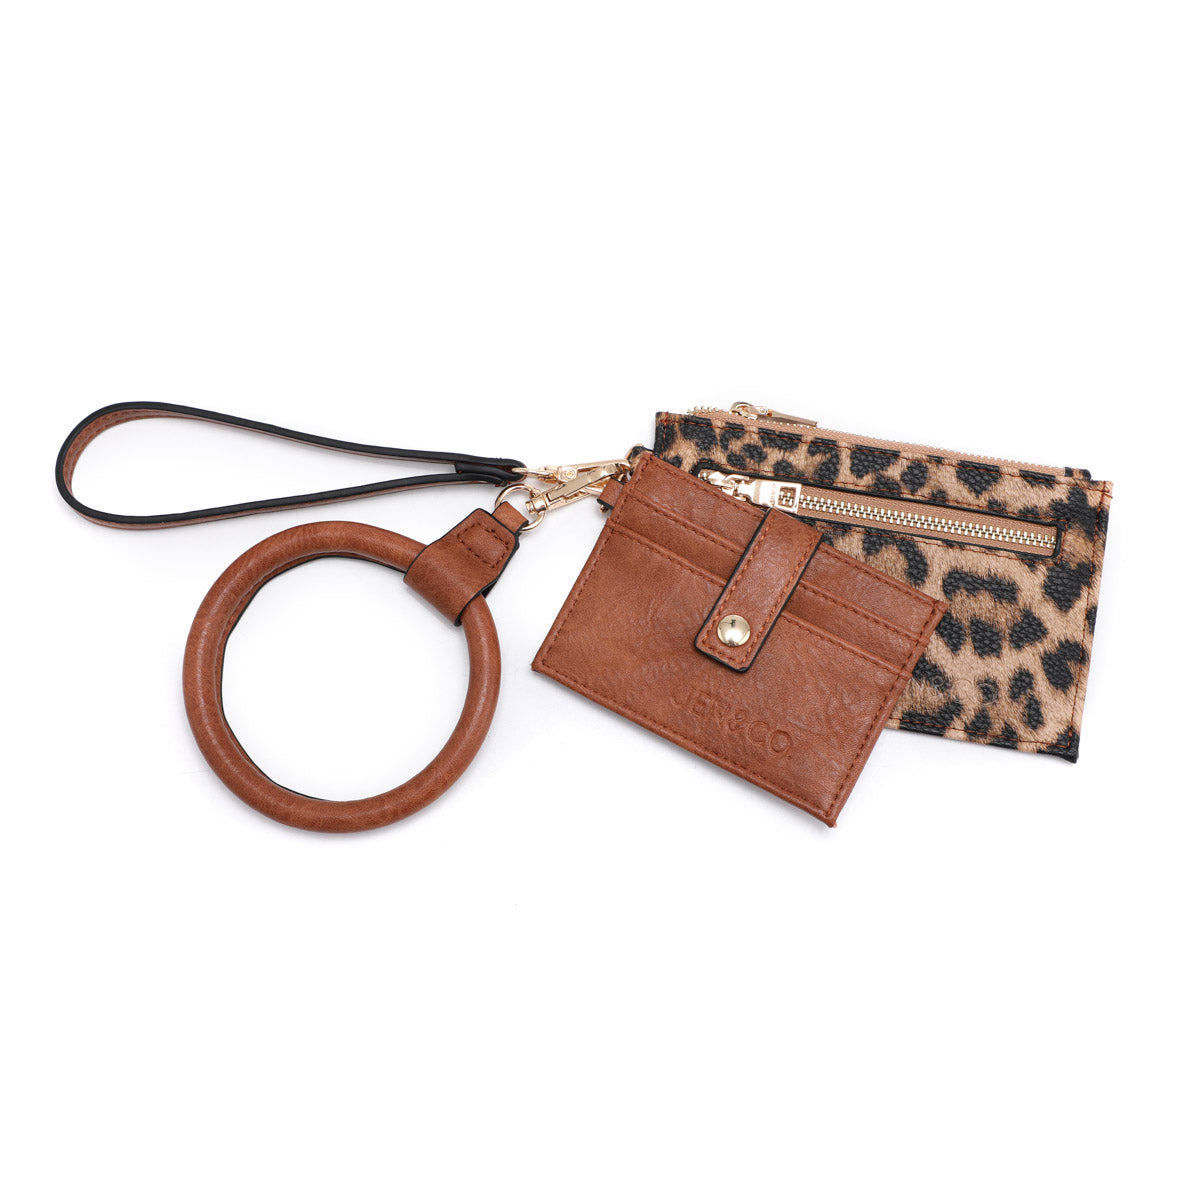 Libby Bangle Wallet (More Color Options)